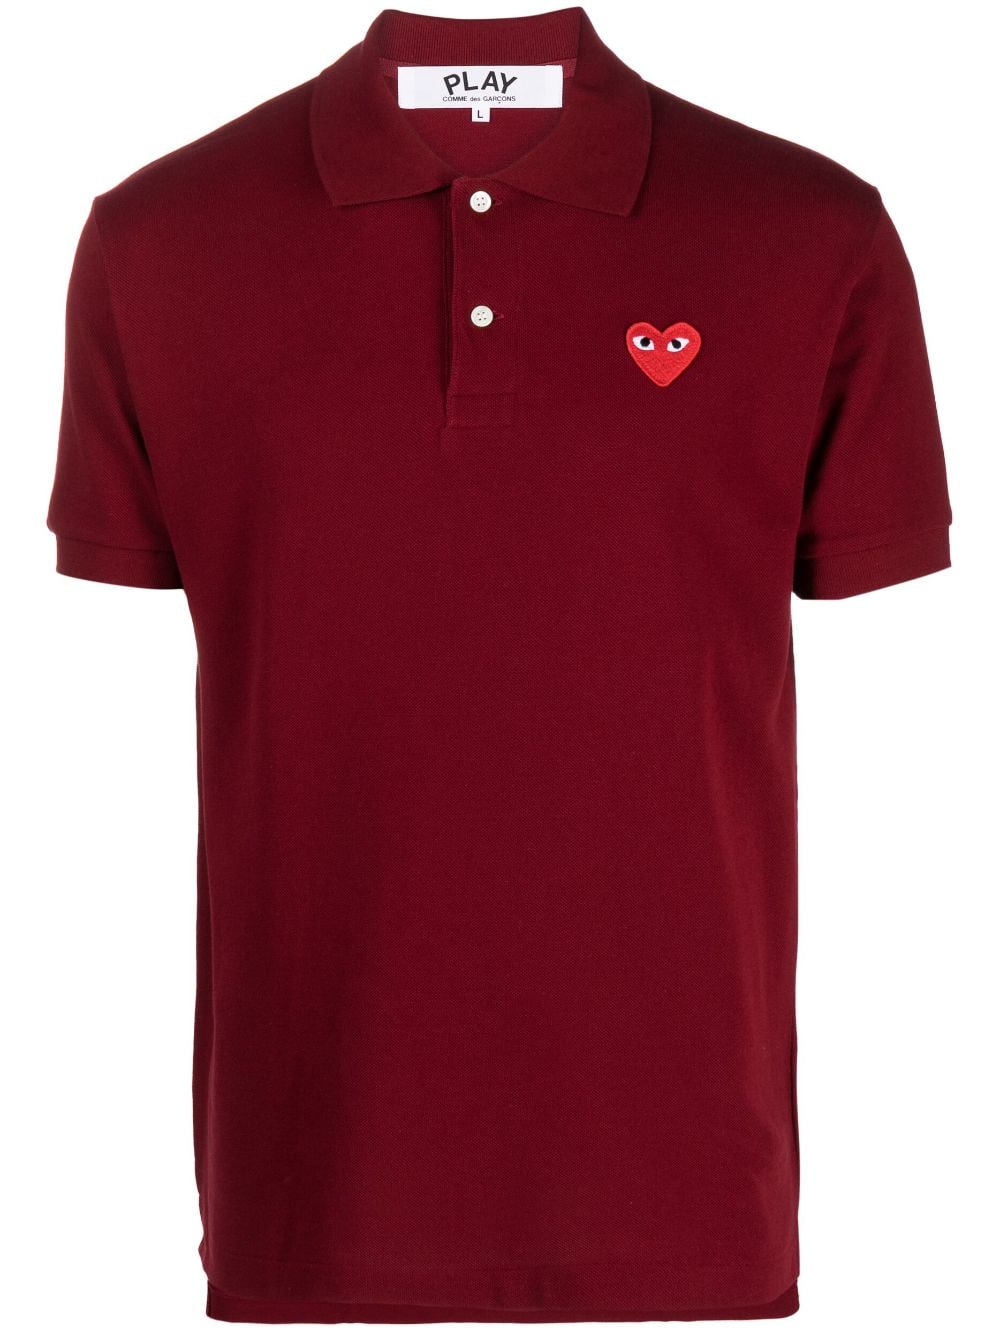 Comme Des Garçons Play embroidered heart polo shirt von Comme Des Garçons Play